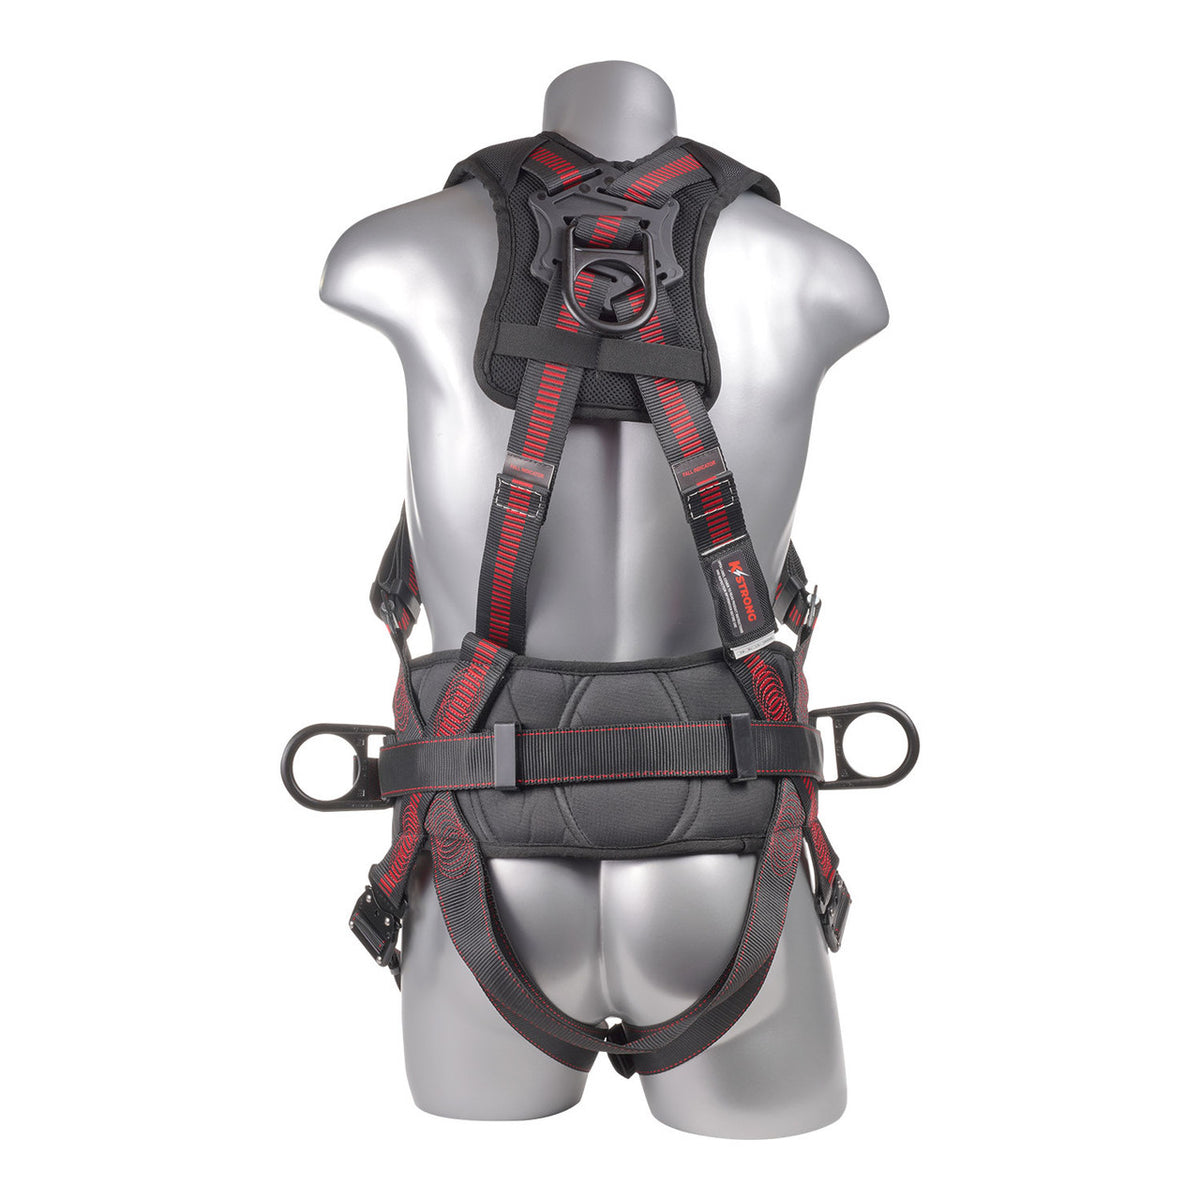 KStrong® Kapture Epic 5-Point Full Body Harness, Padded, 3 D-Rings, QC Chest and Legs (ANSI)